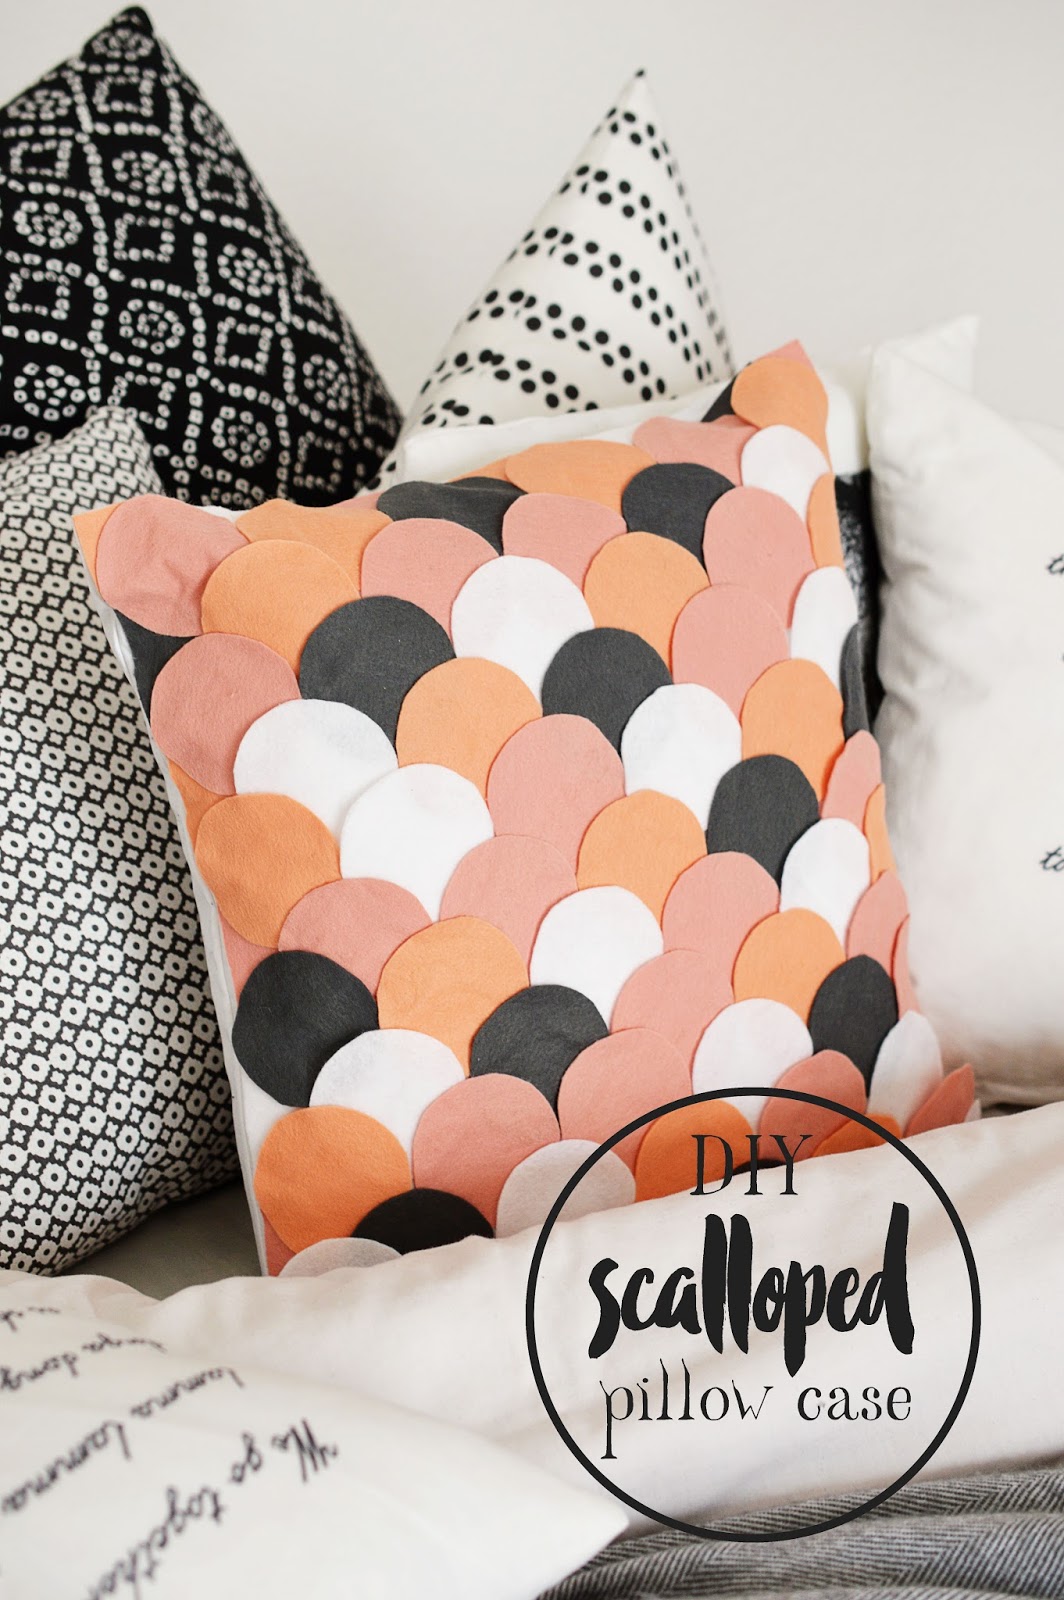 15. DIY Scalloped Pillow Cover Project